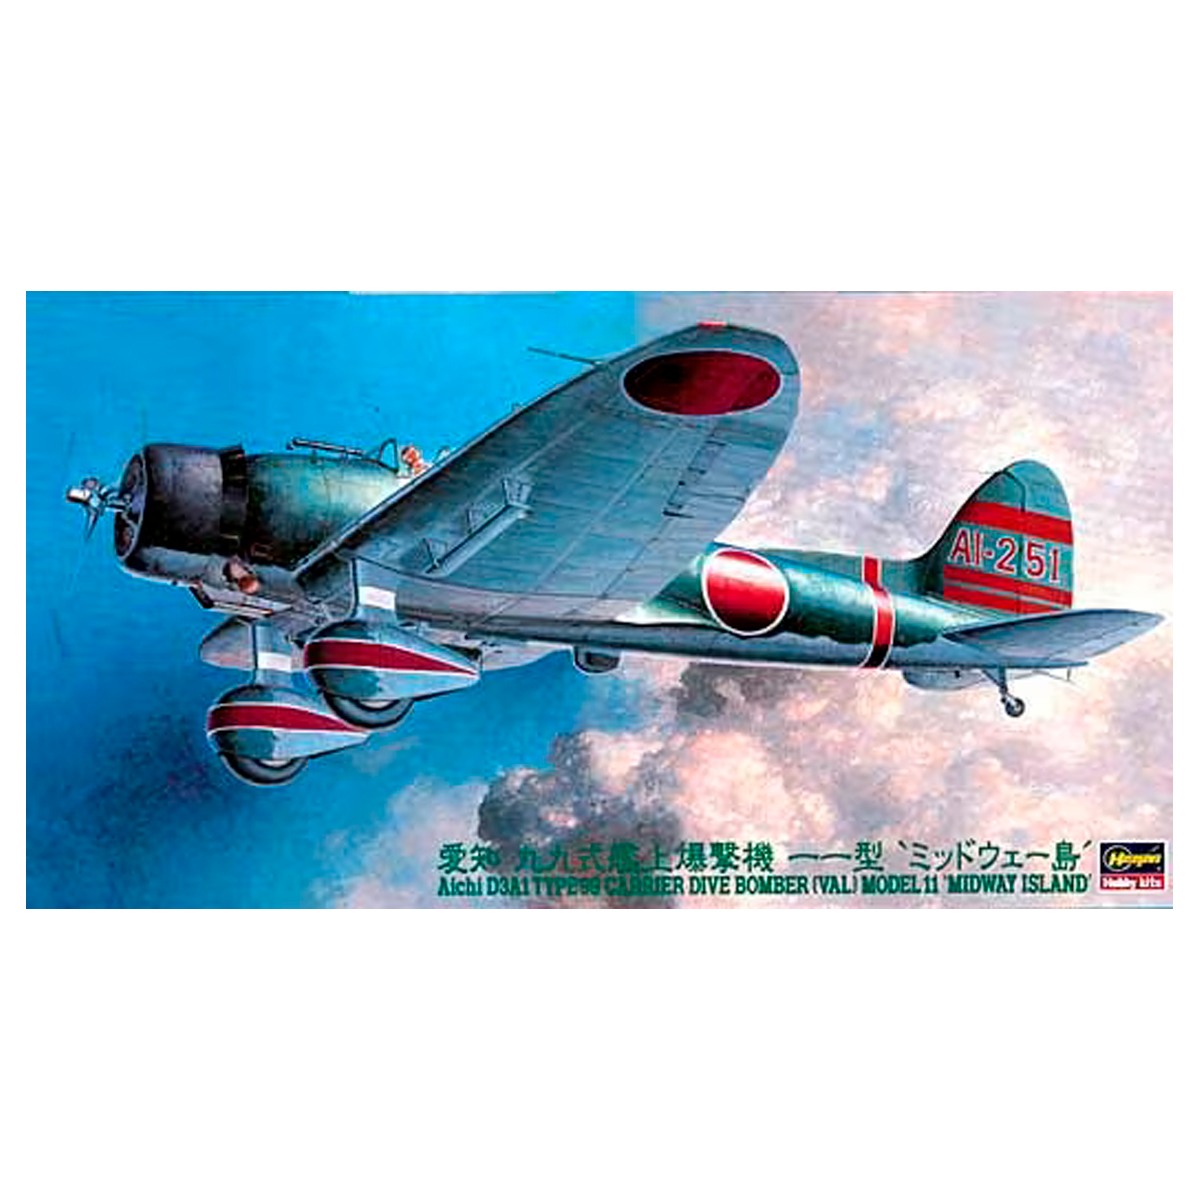 JT-56-09056 1/48 Aichi D3A1 Type 99 Carrier Dive Bomber (Val) Model 11 – Midway Island